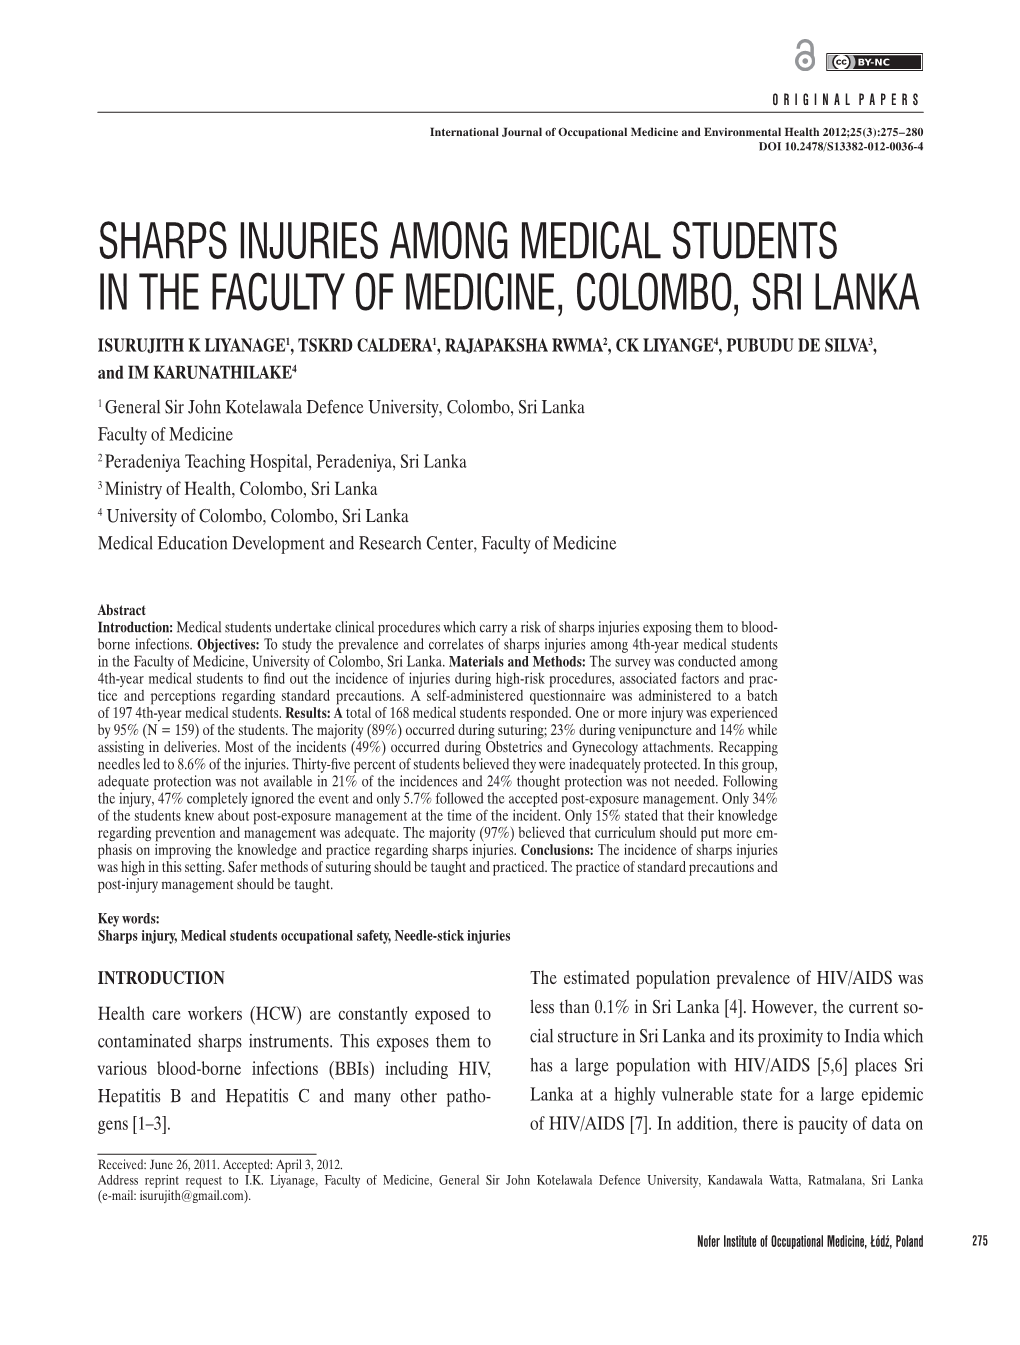 Sharps Injuries Among Medical Students in The